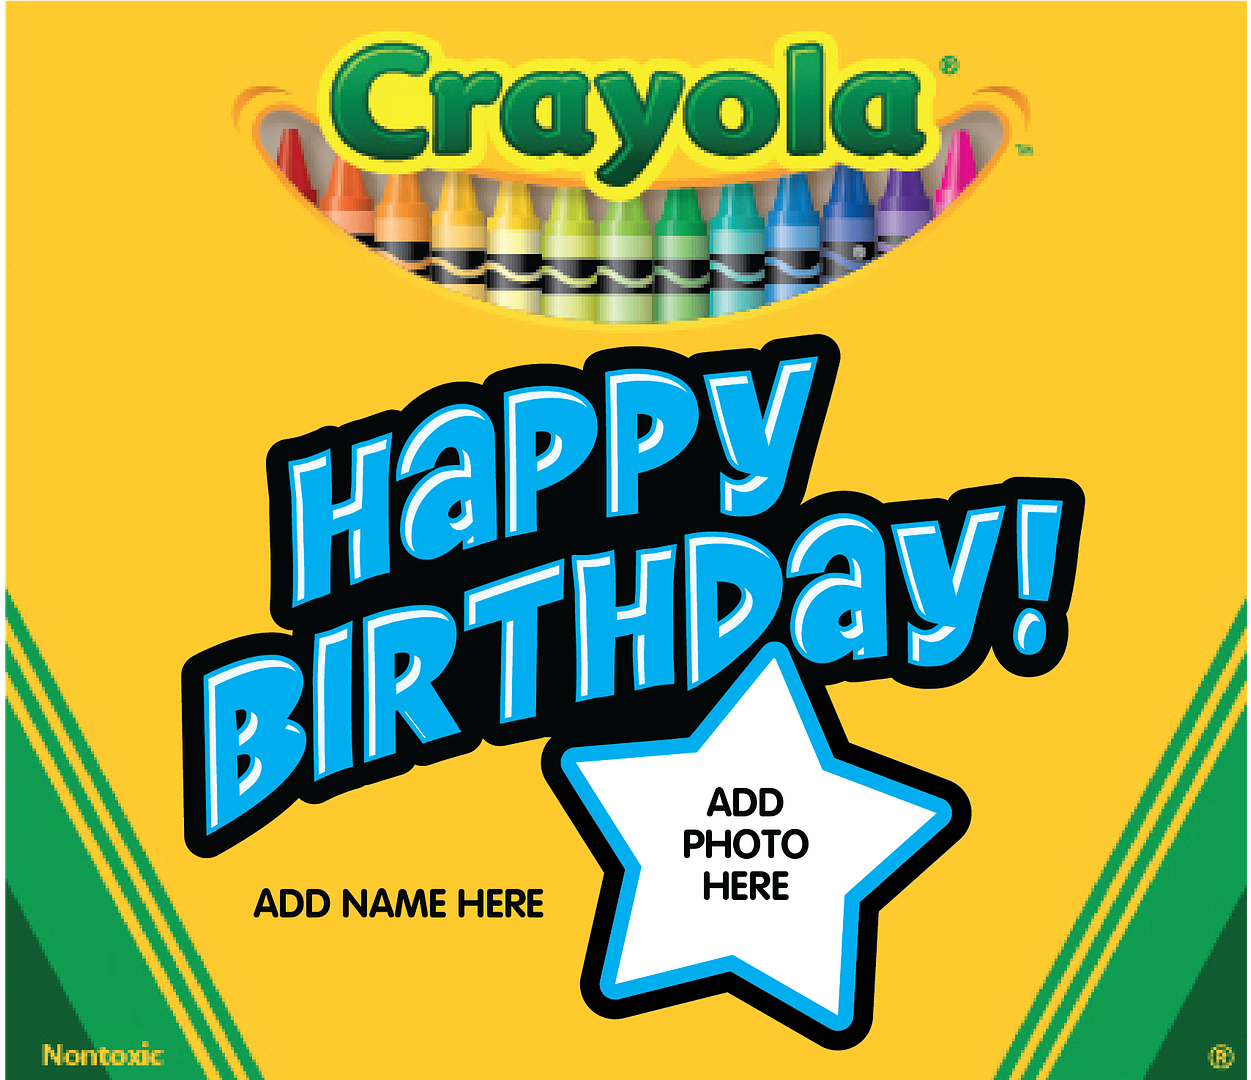 New Custom Crayola crayon boxes let you choose the colors inside and personalize the box with lots of options!